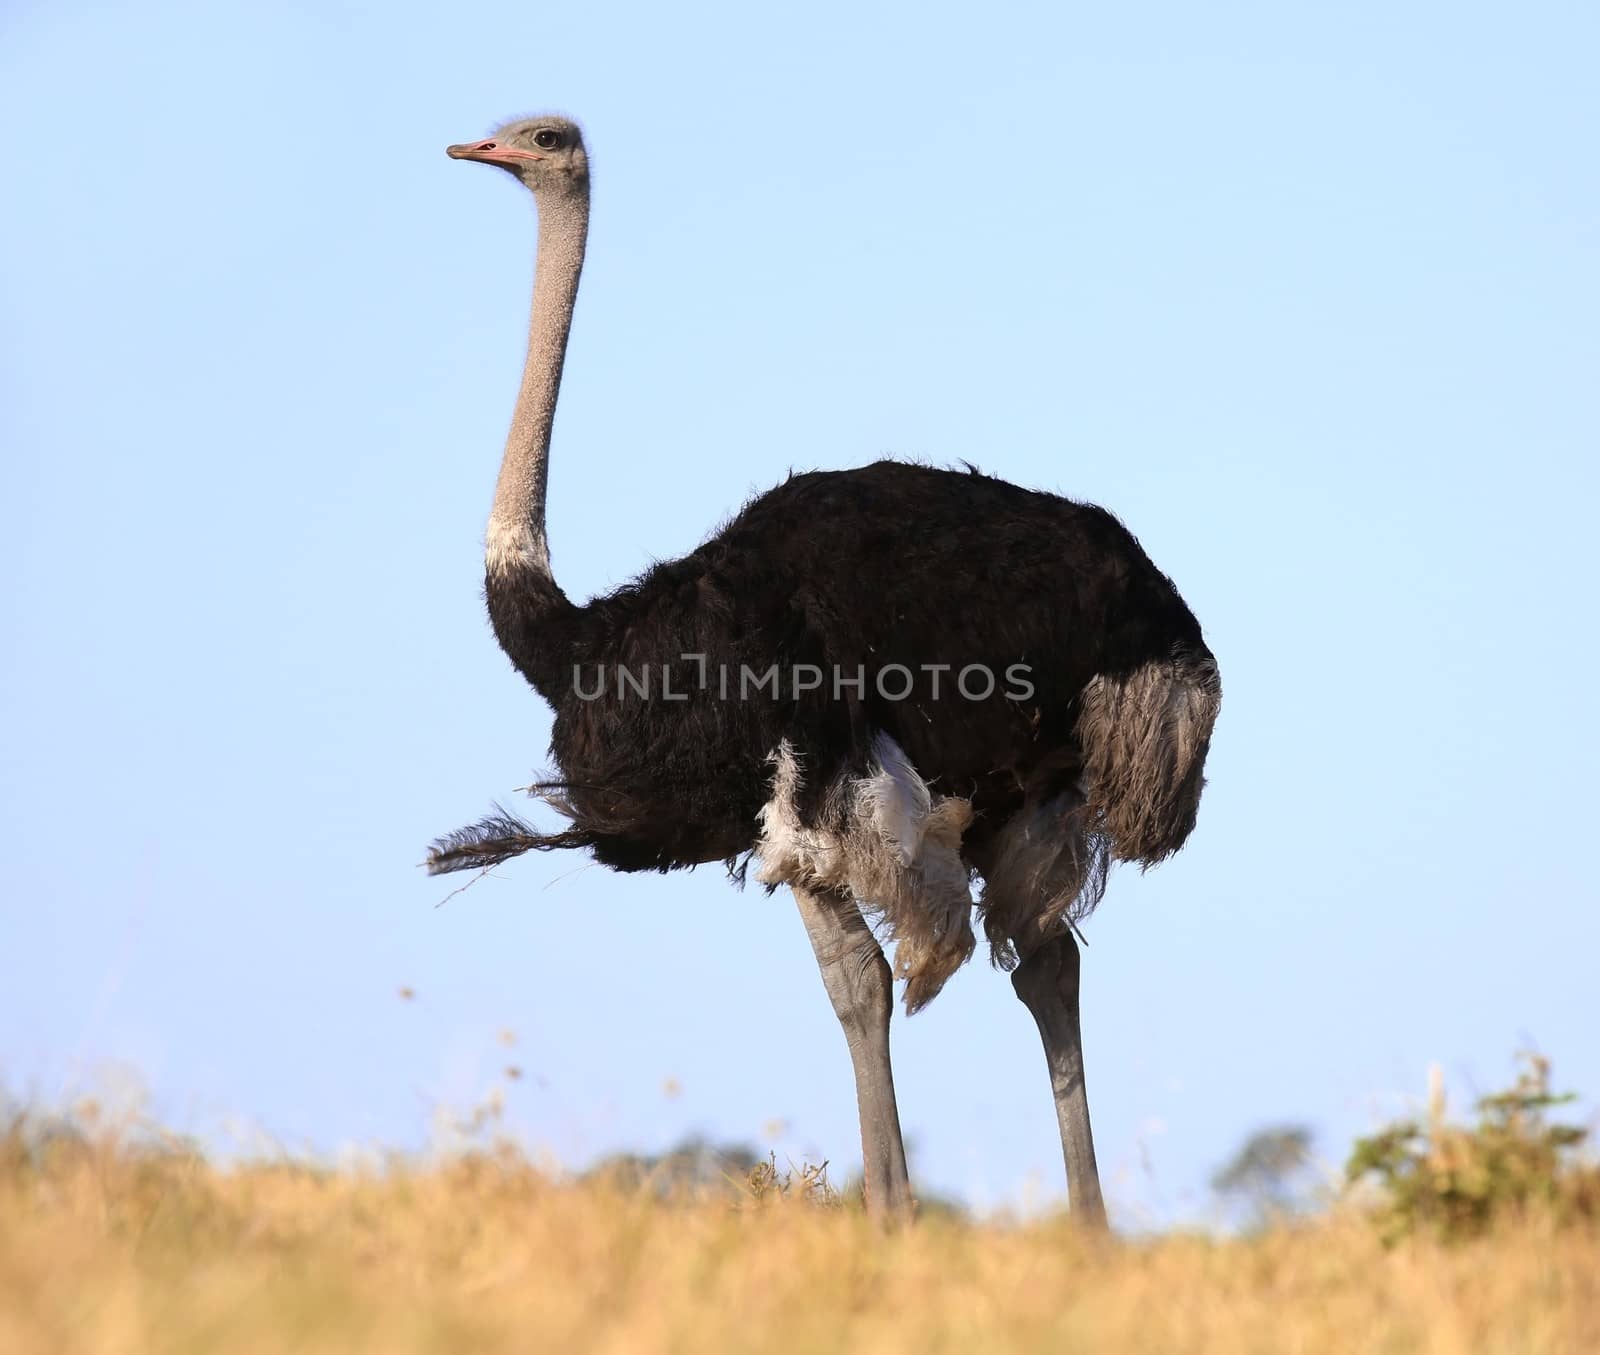 Male ostrich bird with black feathers and long neck